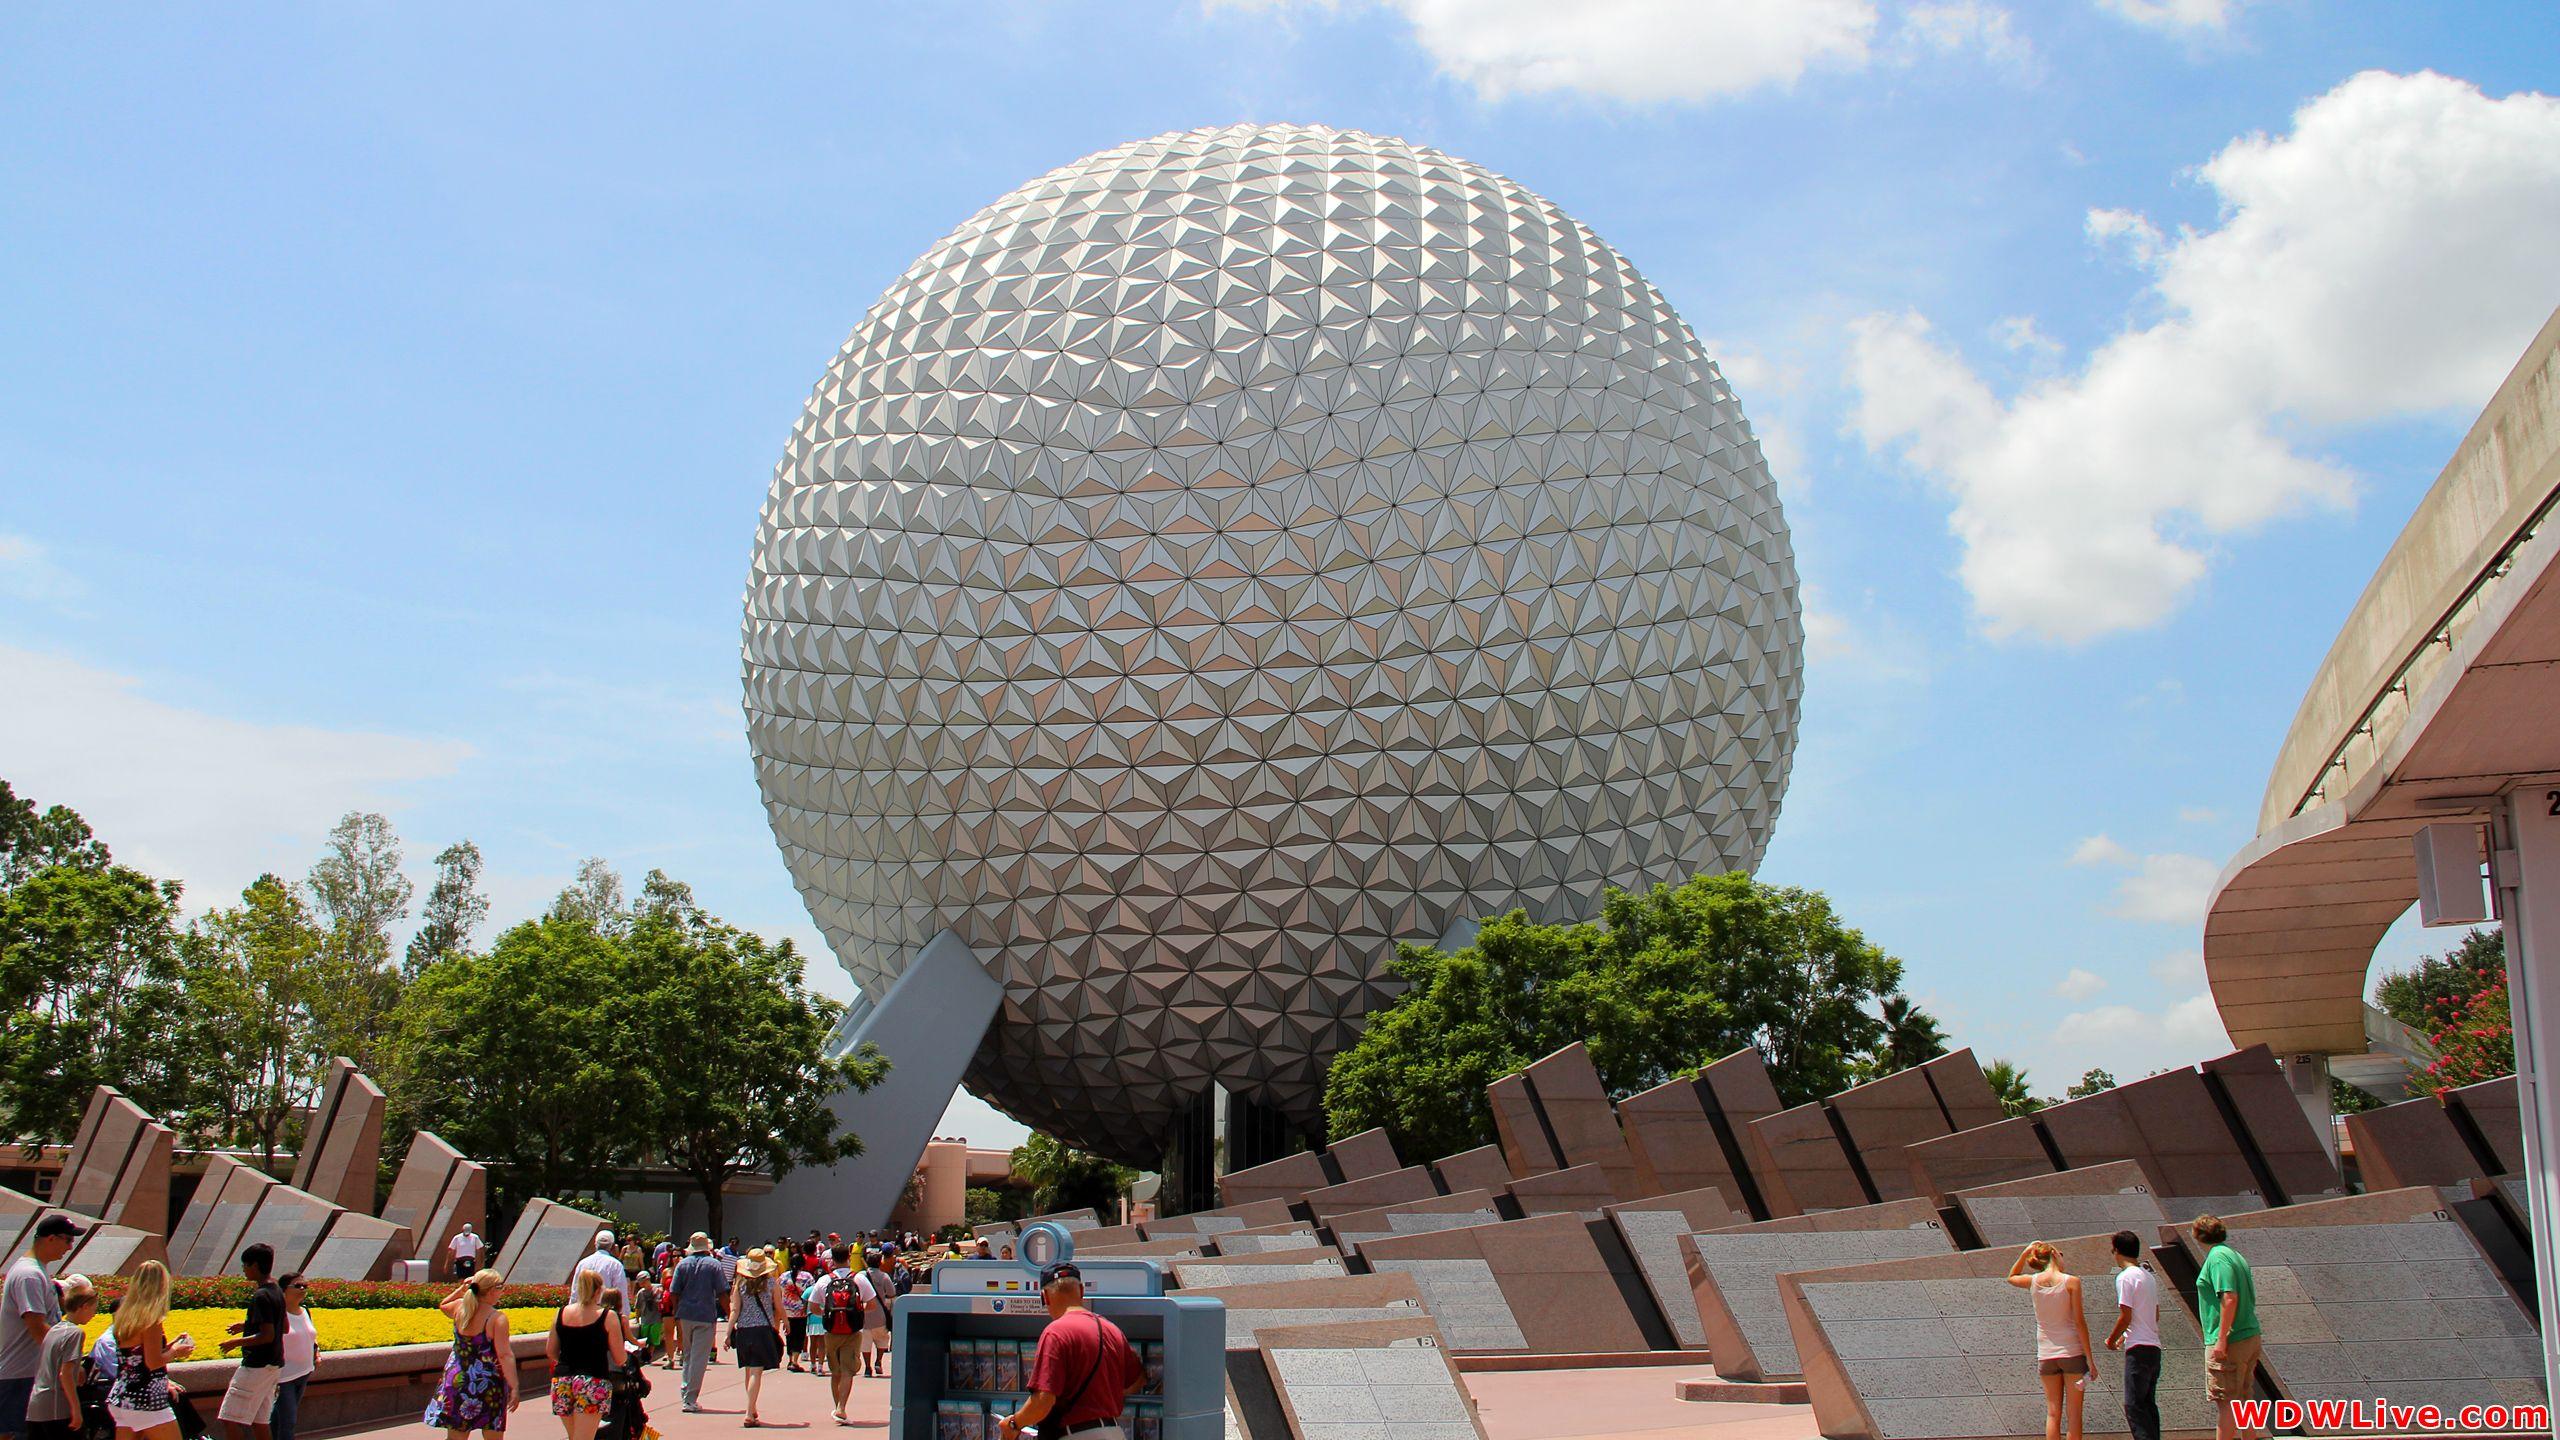 Spaceship Earth: A beautiful day to visit Epcot and Spaceship Earth!